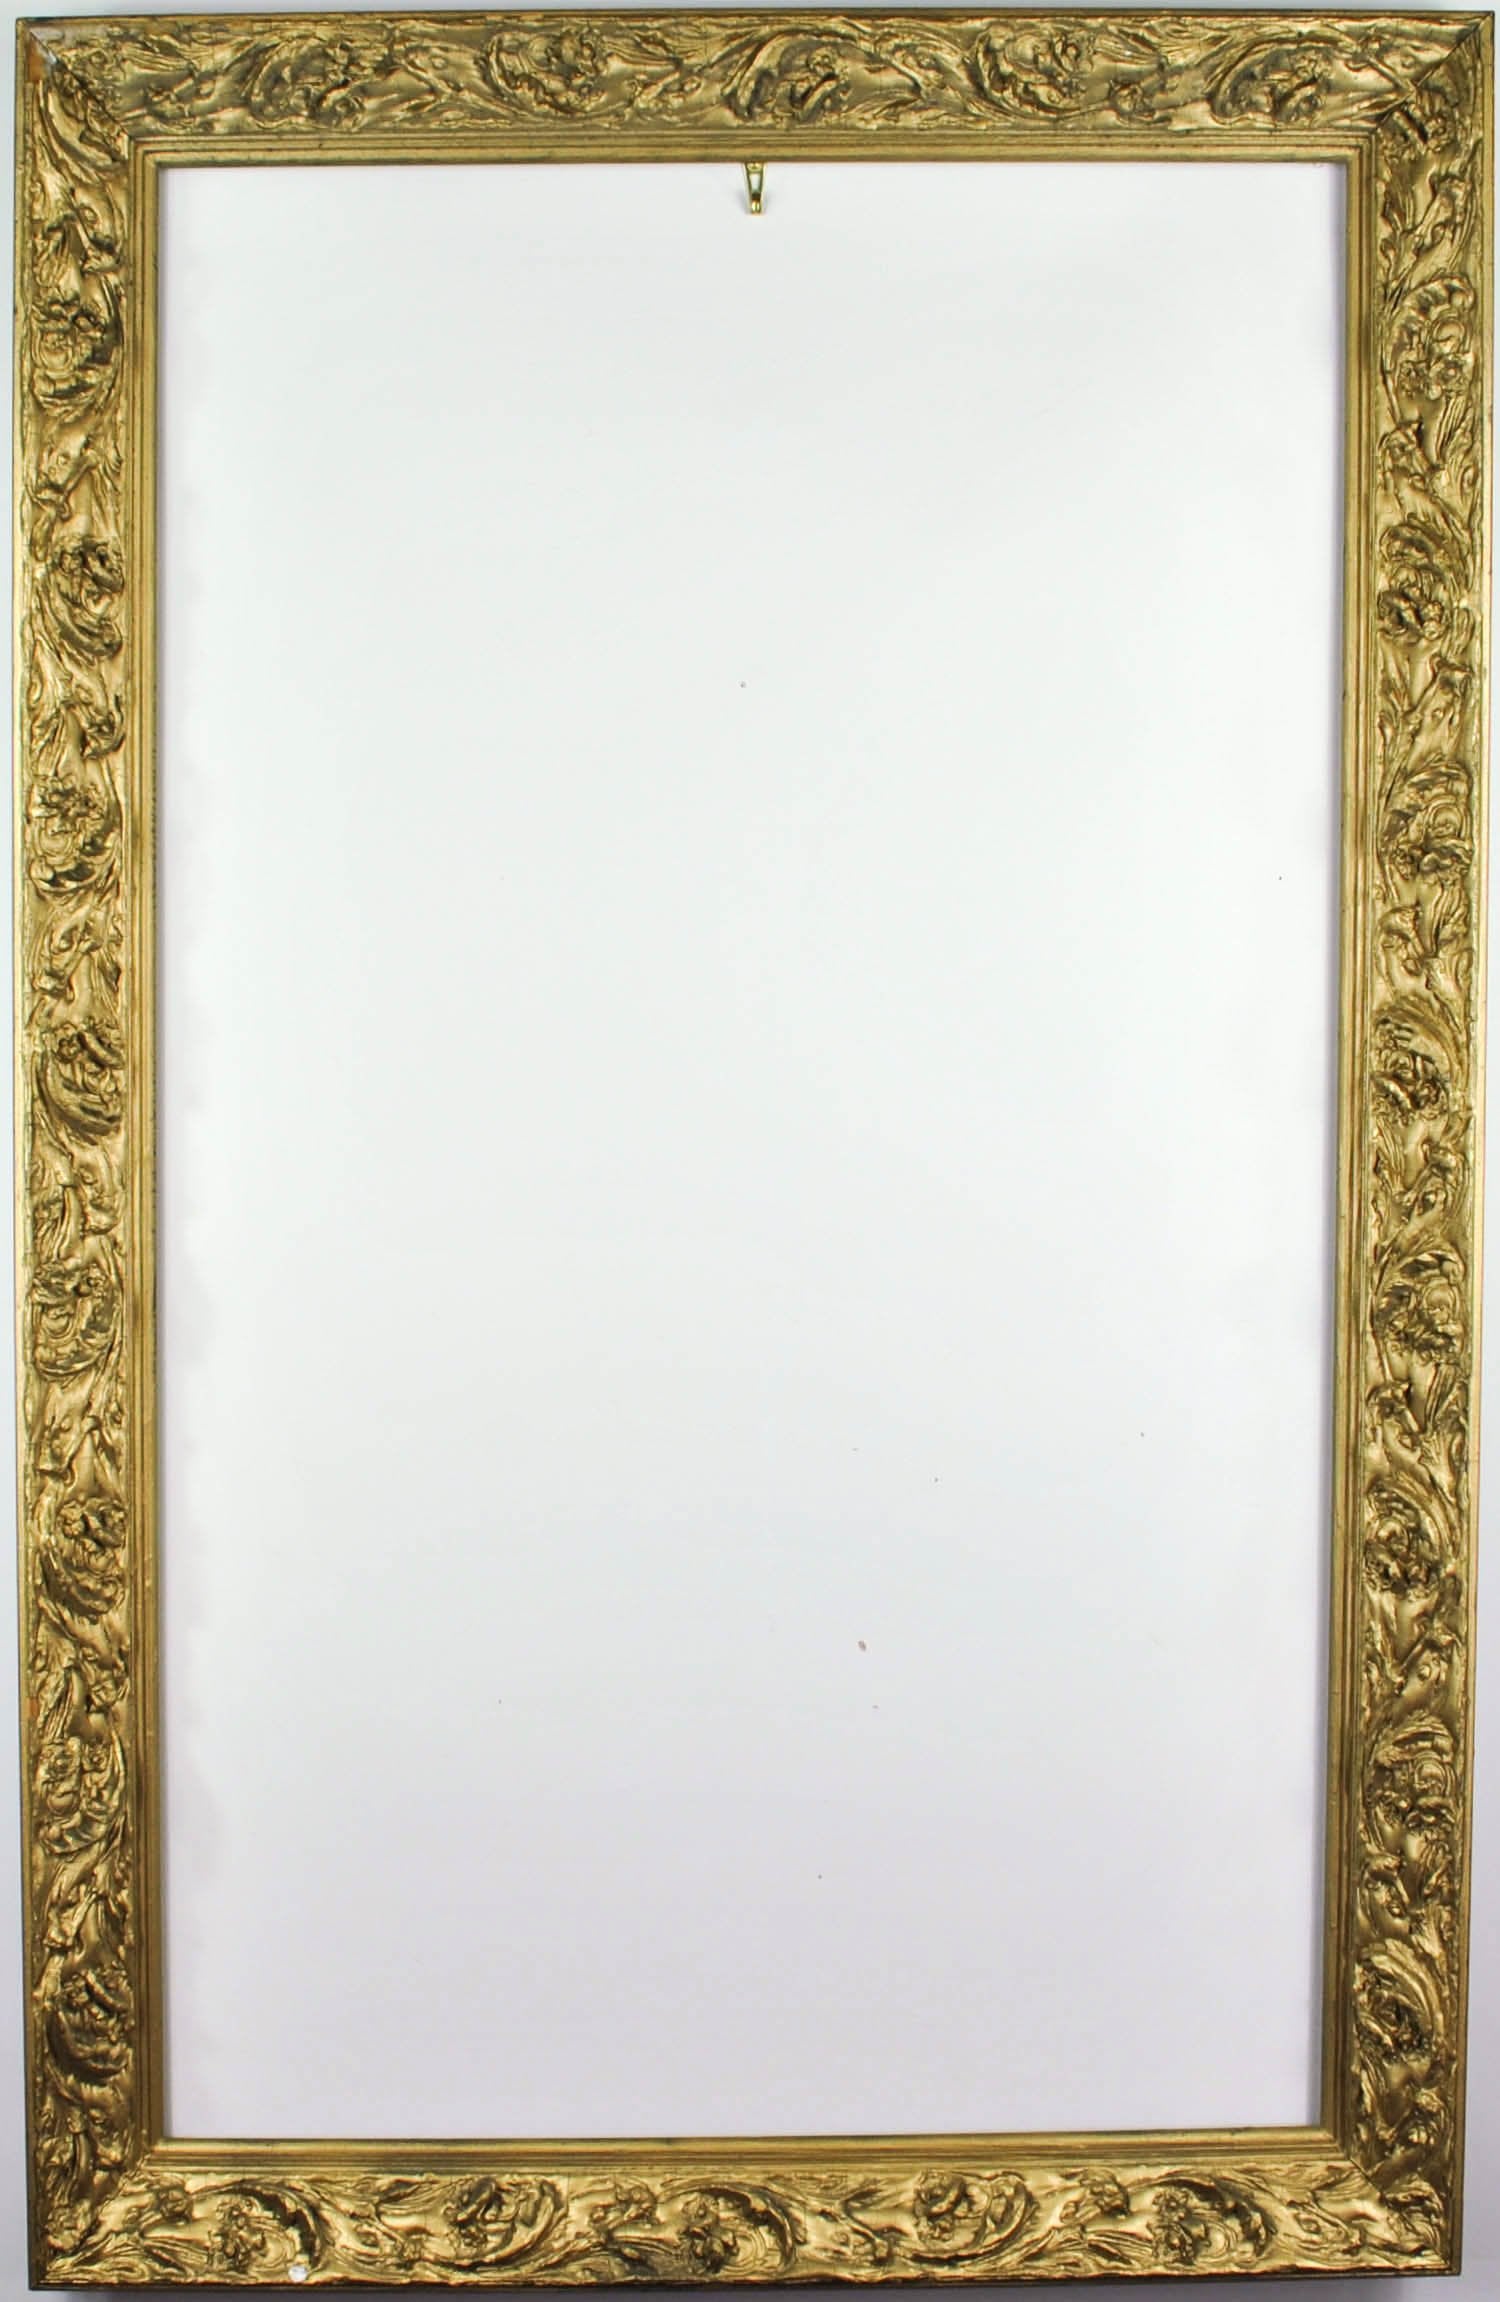 European producer of picture frames